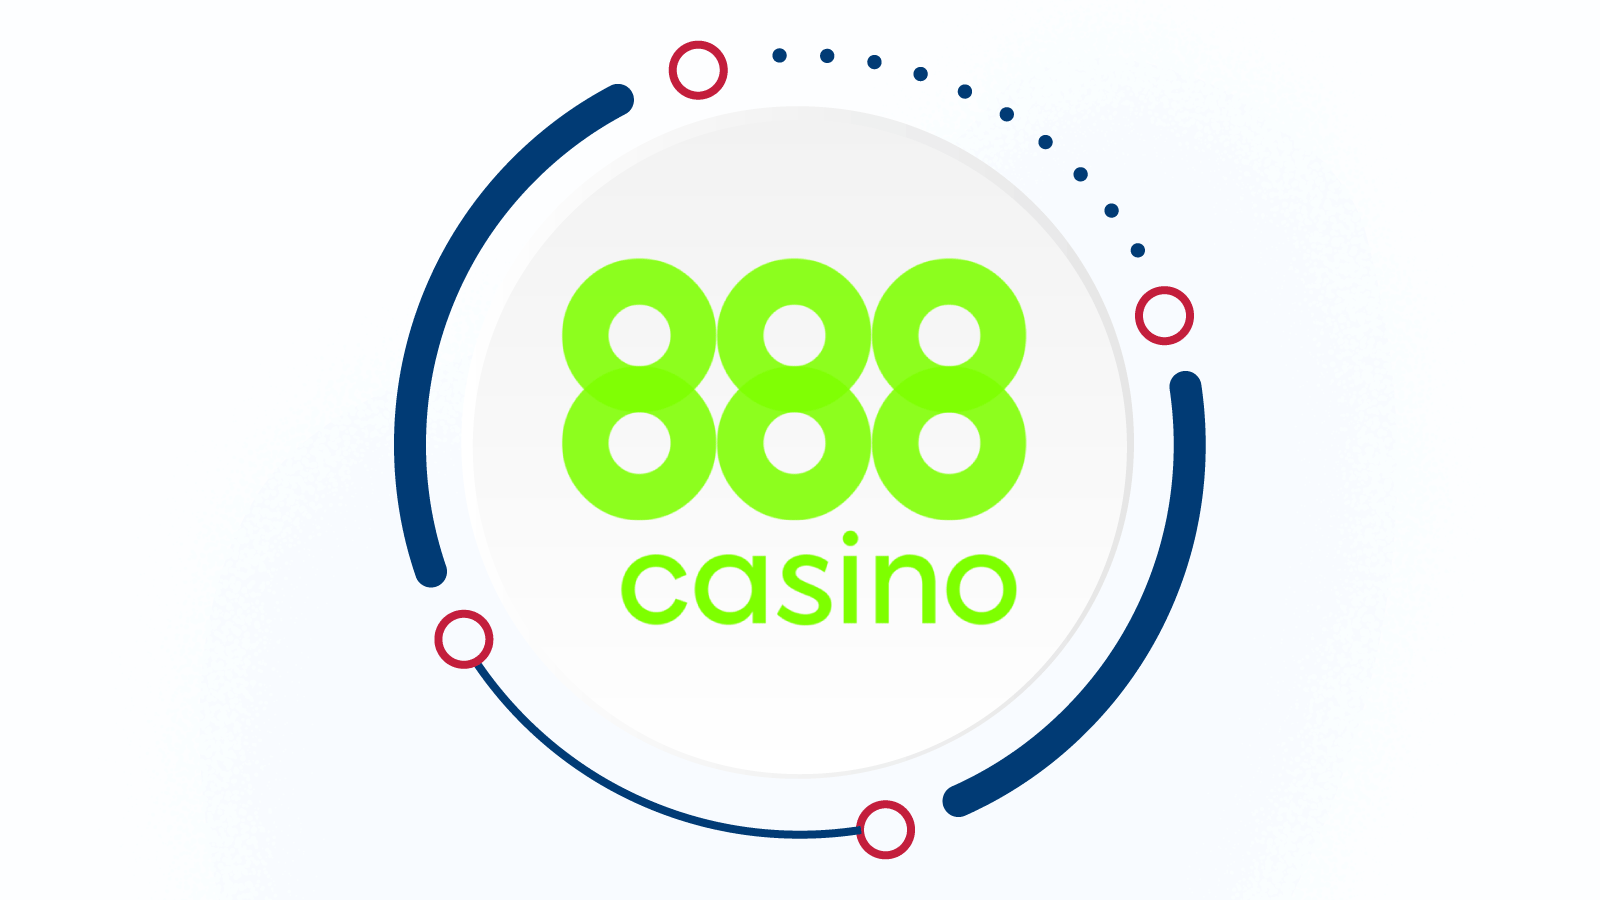 #1 – 888casino hosts the best Canadian slots